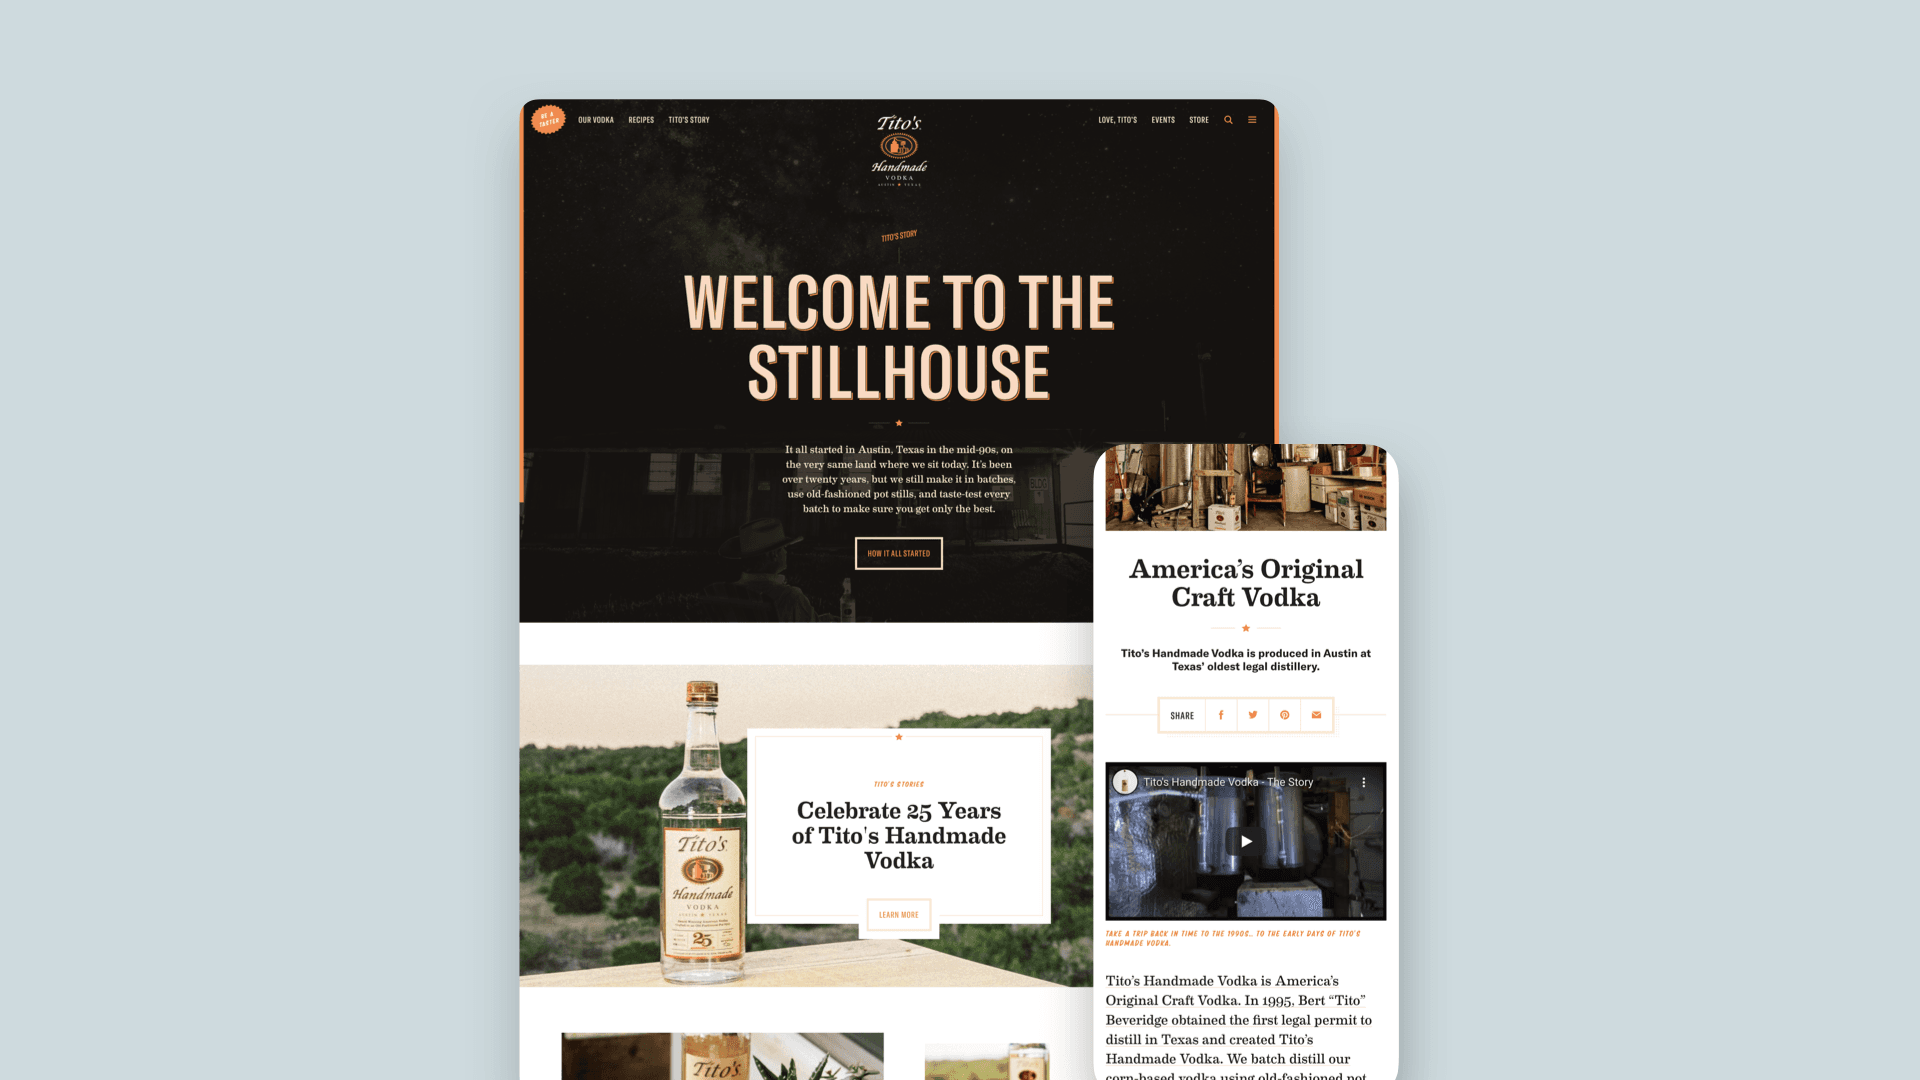 Screenshots of the Tito’s Website on desktop and mobile